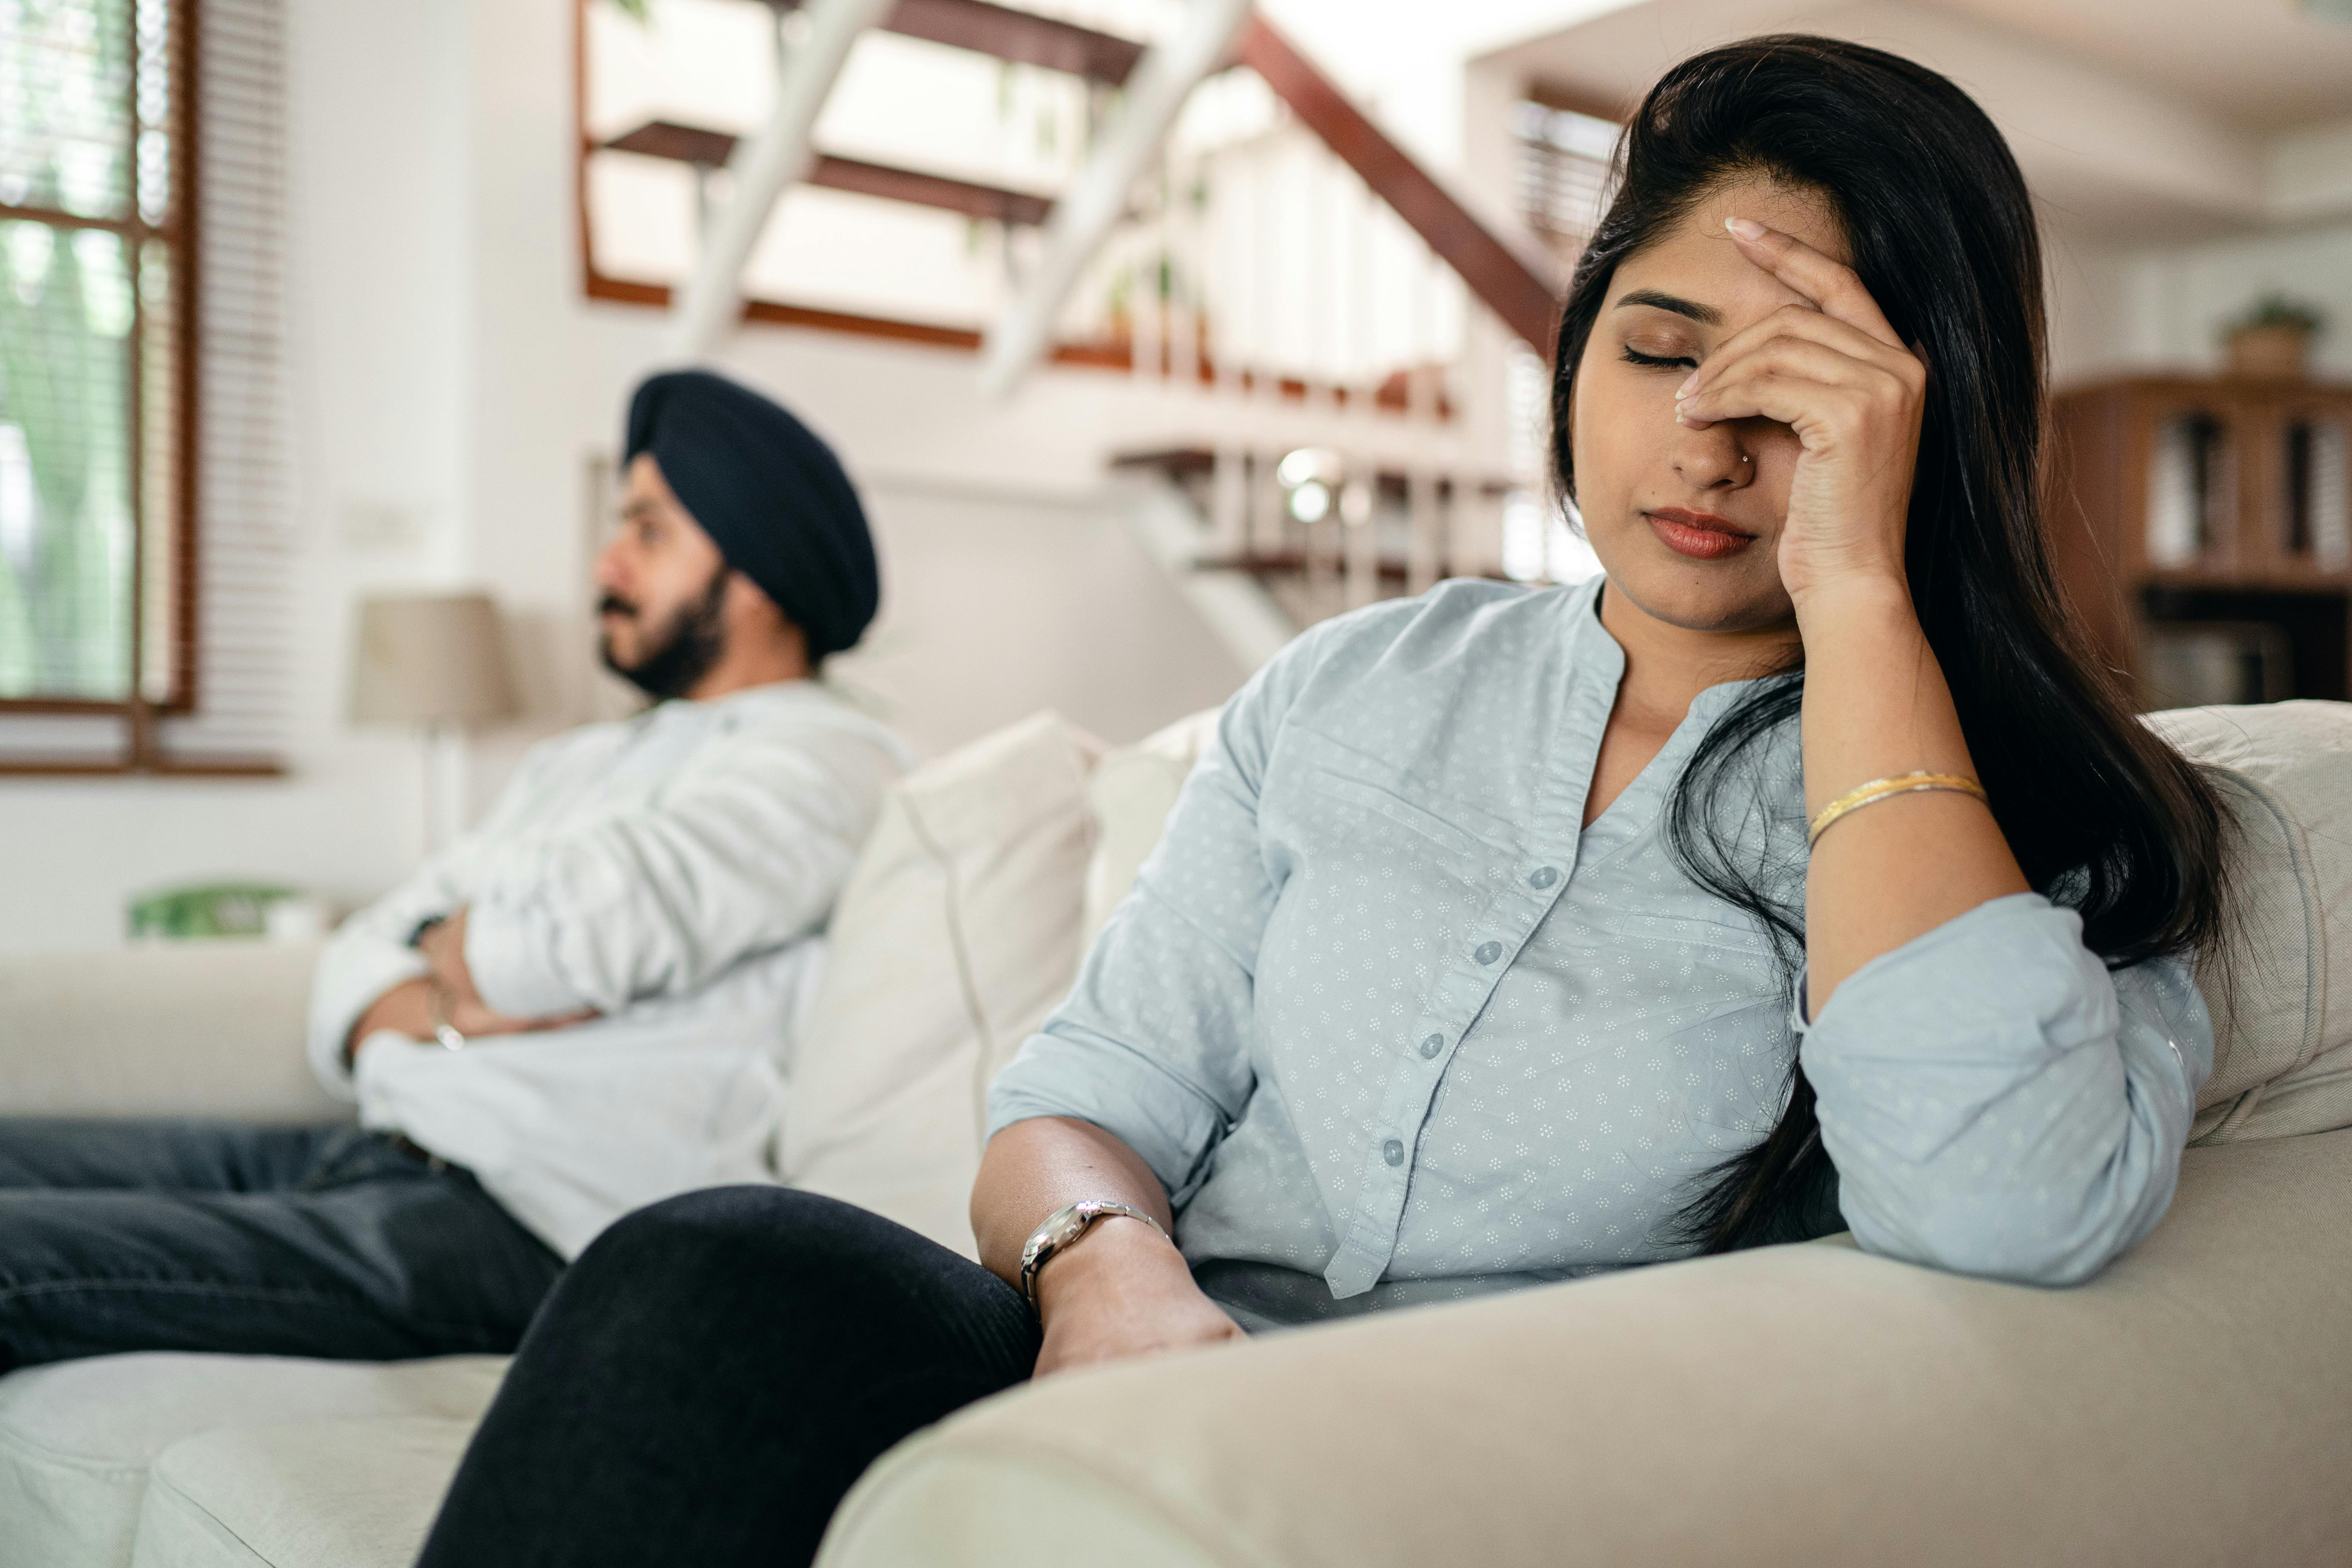 An upset couple after conflict | Source: Pexels